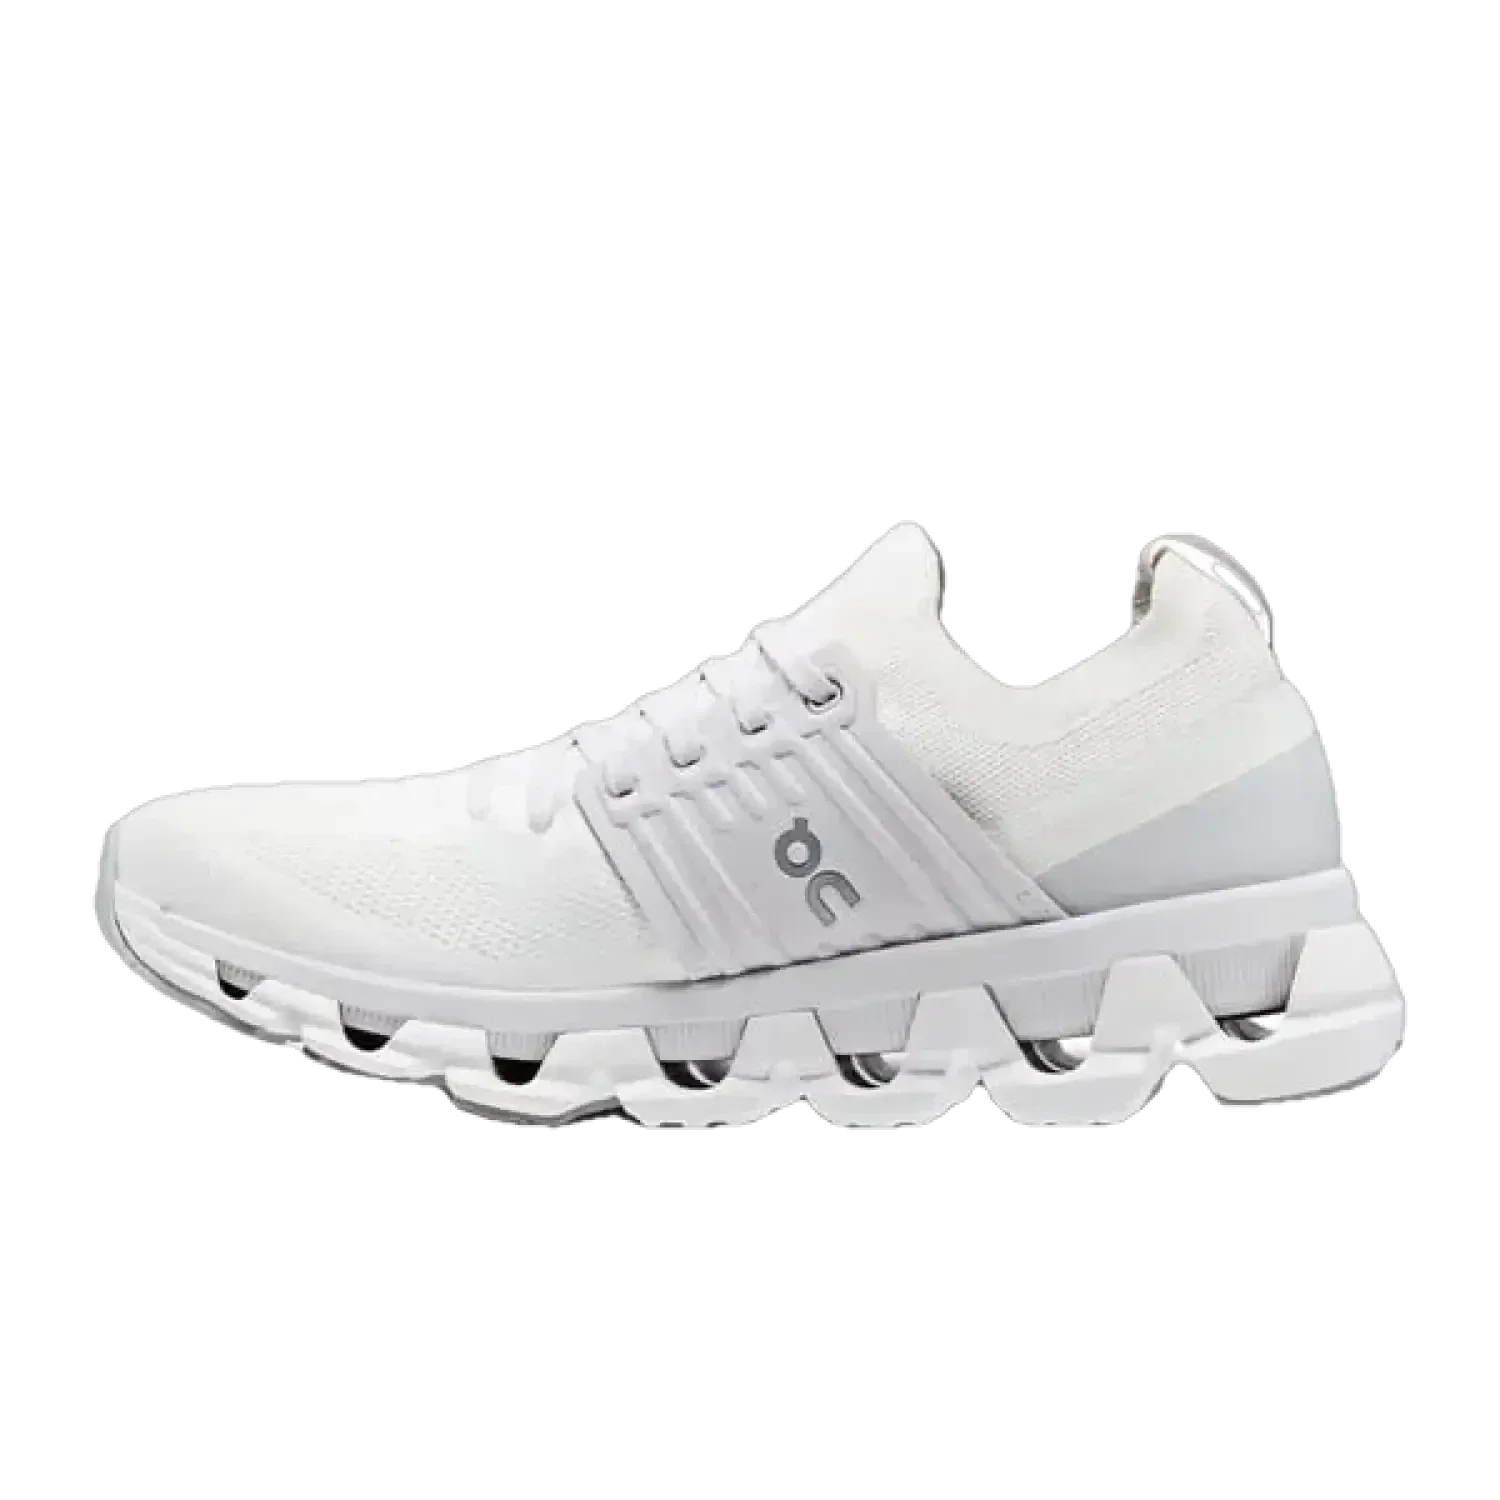 On Running WOMENS FOOTWEAR - WOMENS SHOES - WOMENS SHOES RUNNING Women's Cloudswift 3 WHITE | FROST